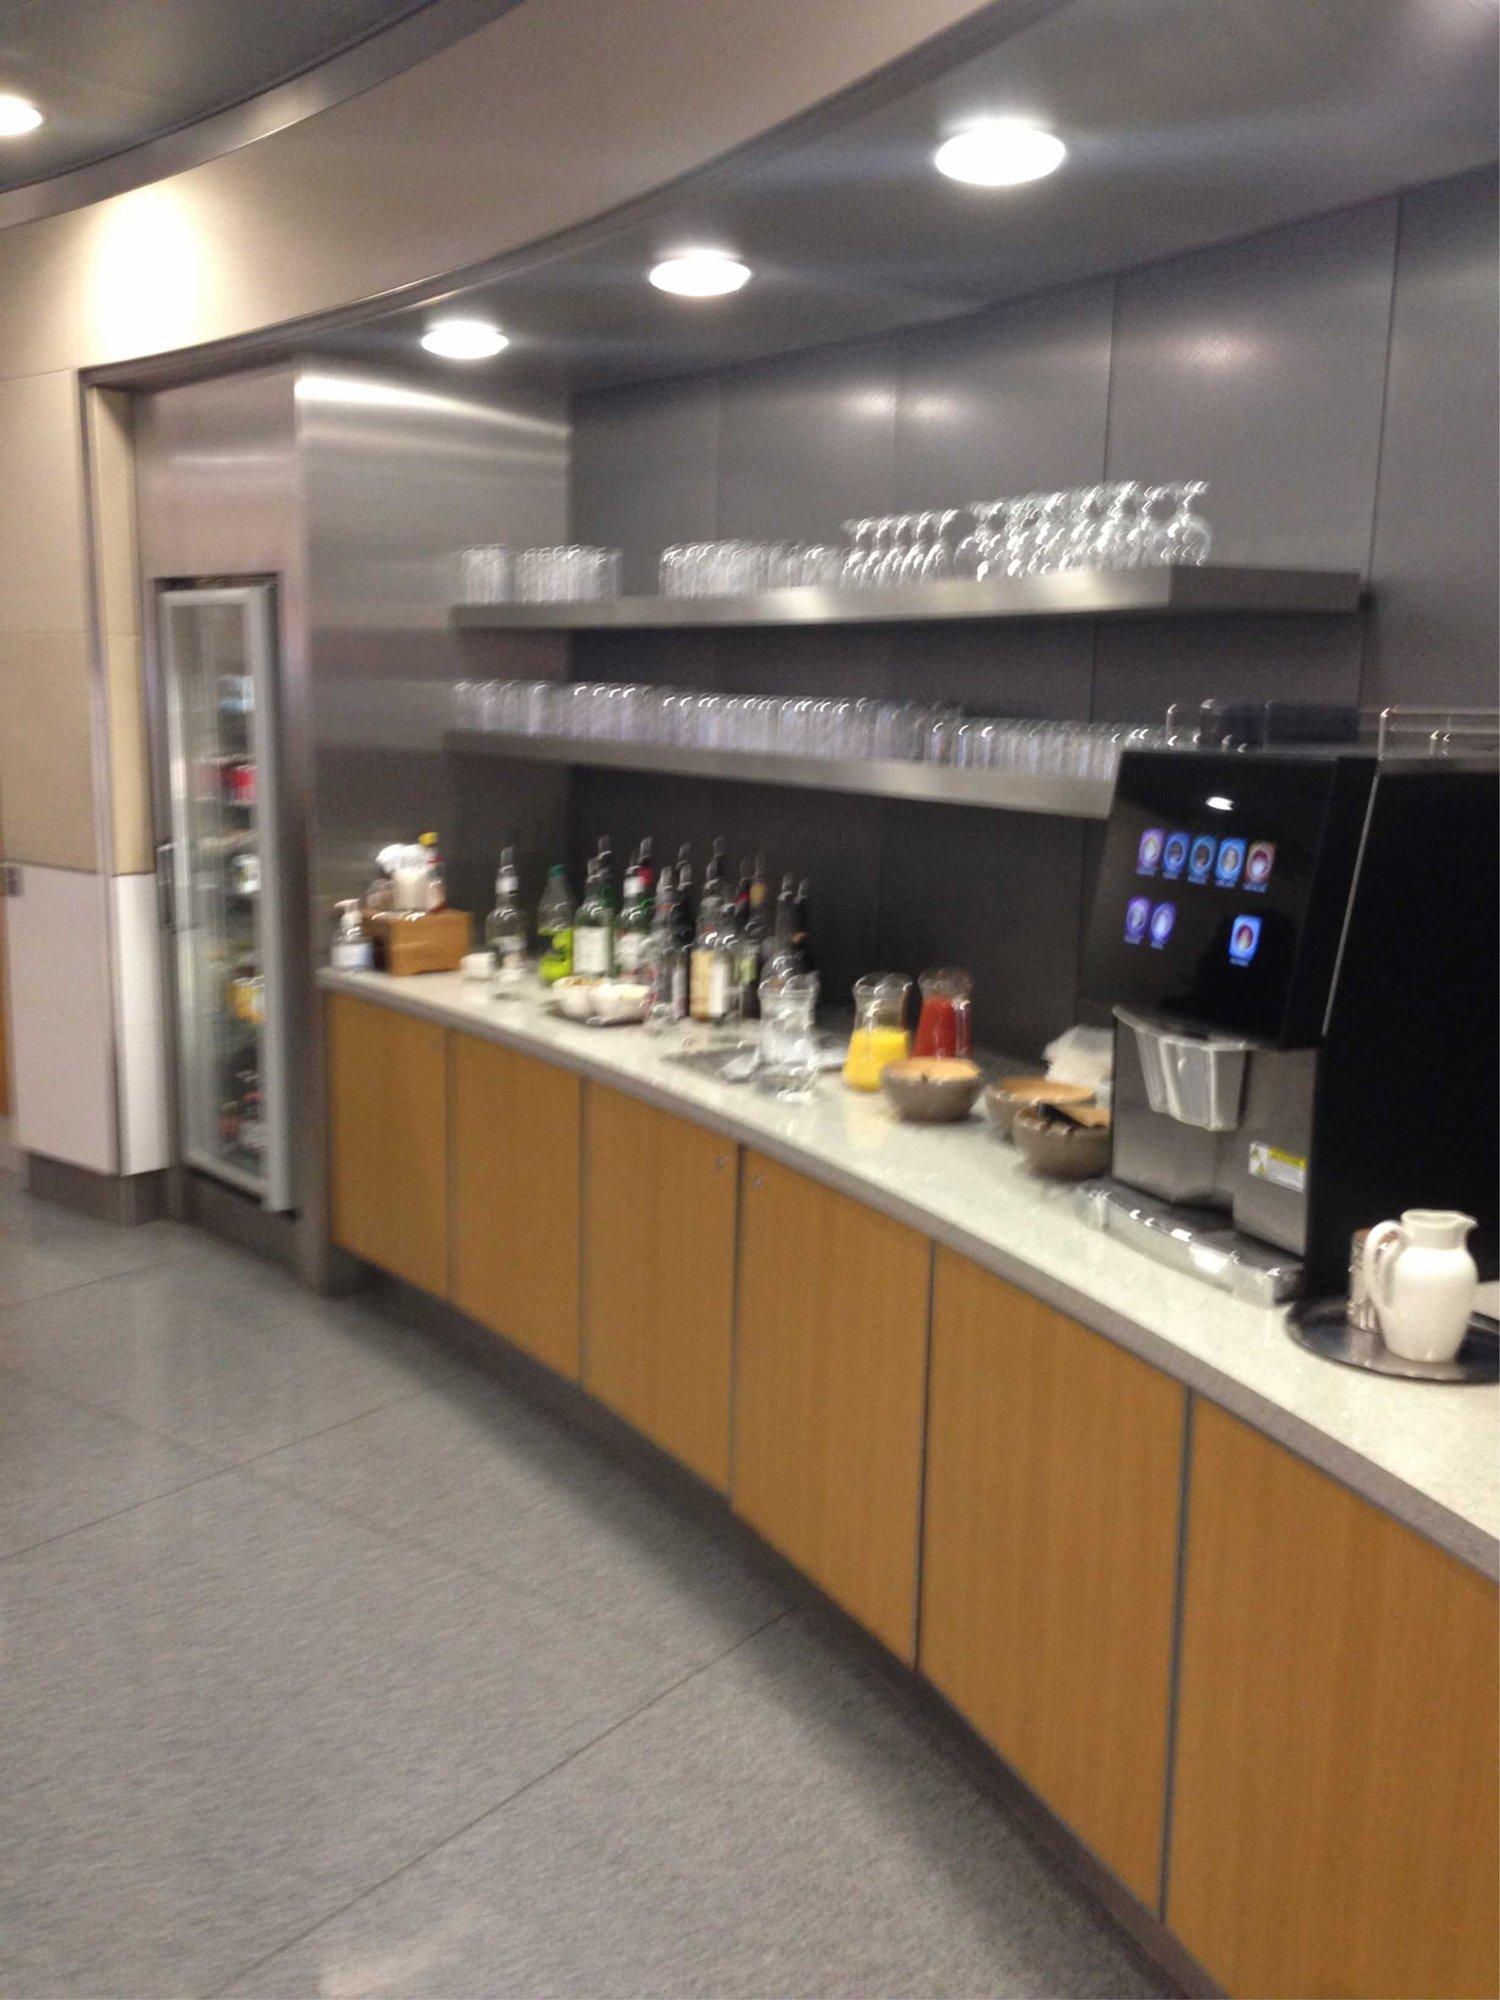 American Airlines Admirals Club image 22 of 38